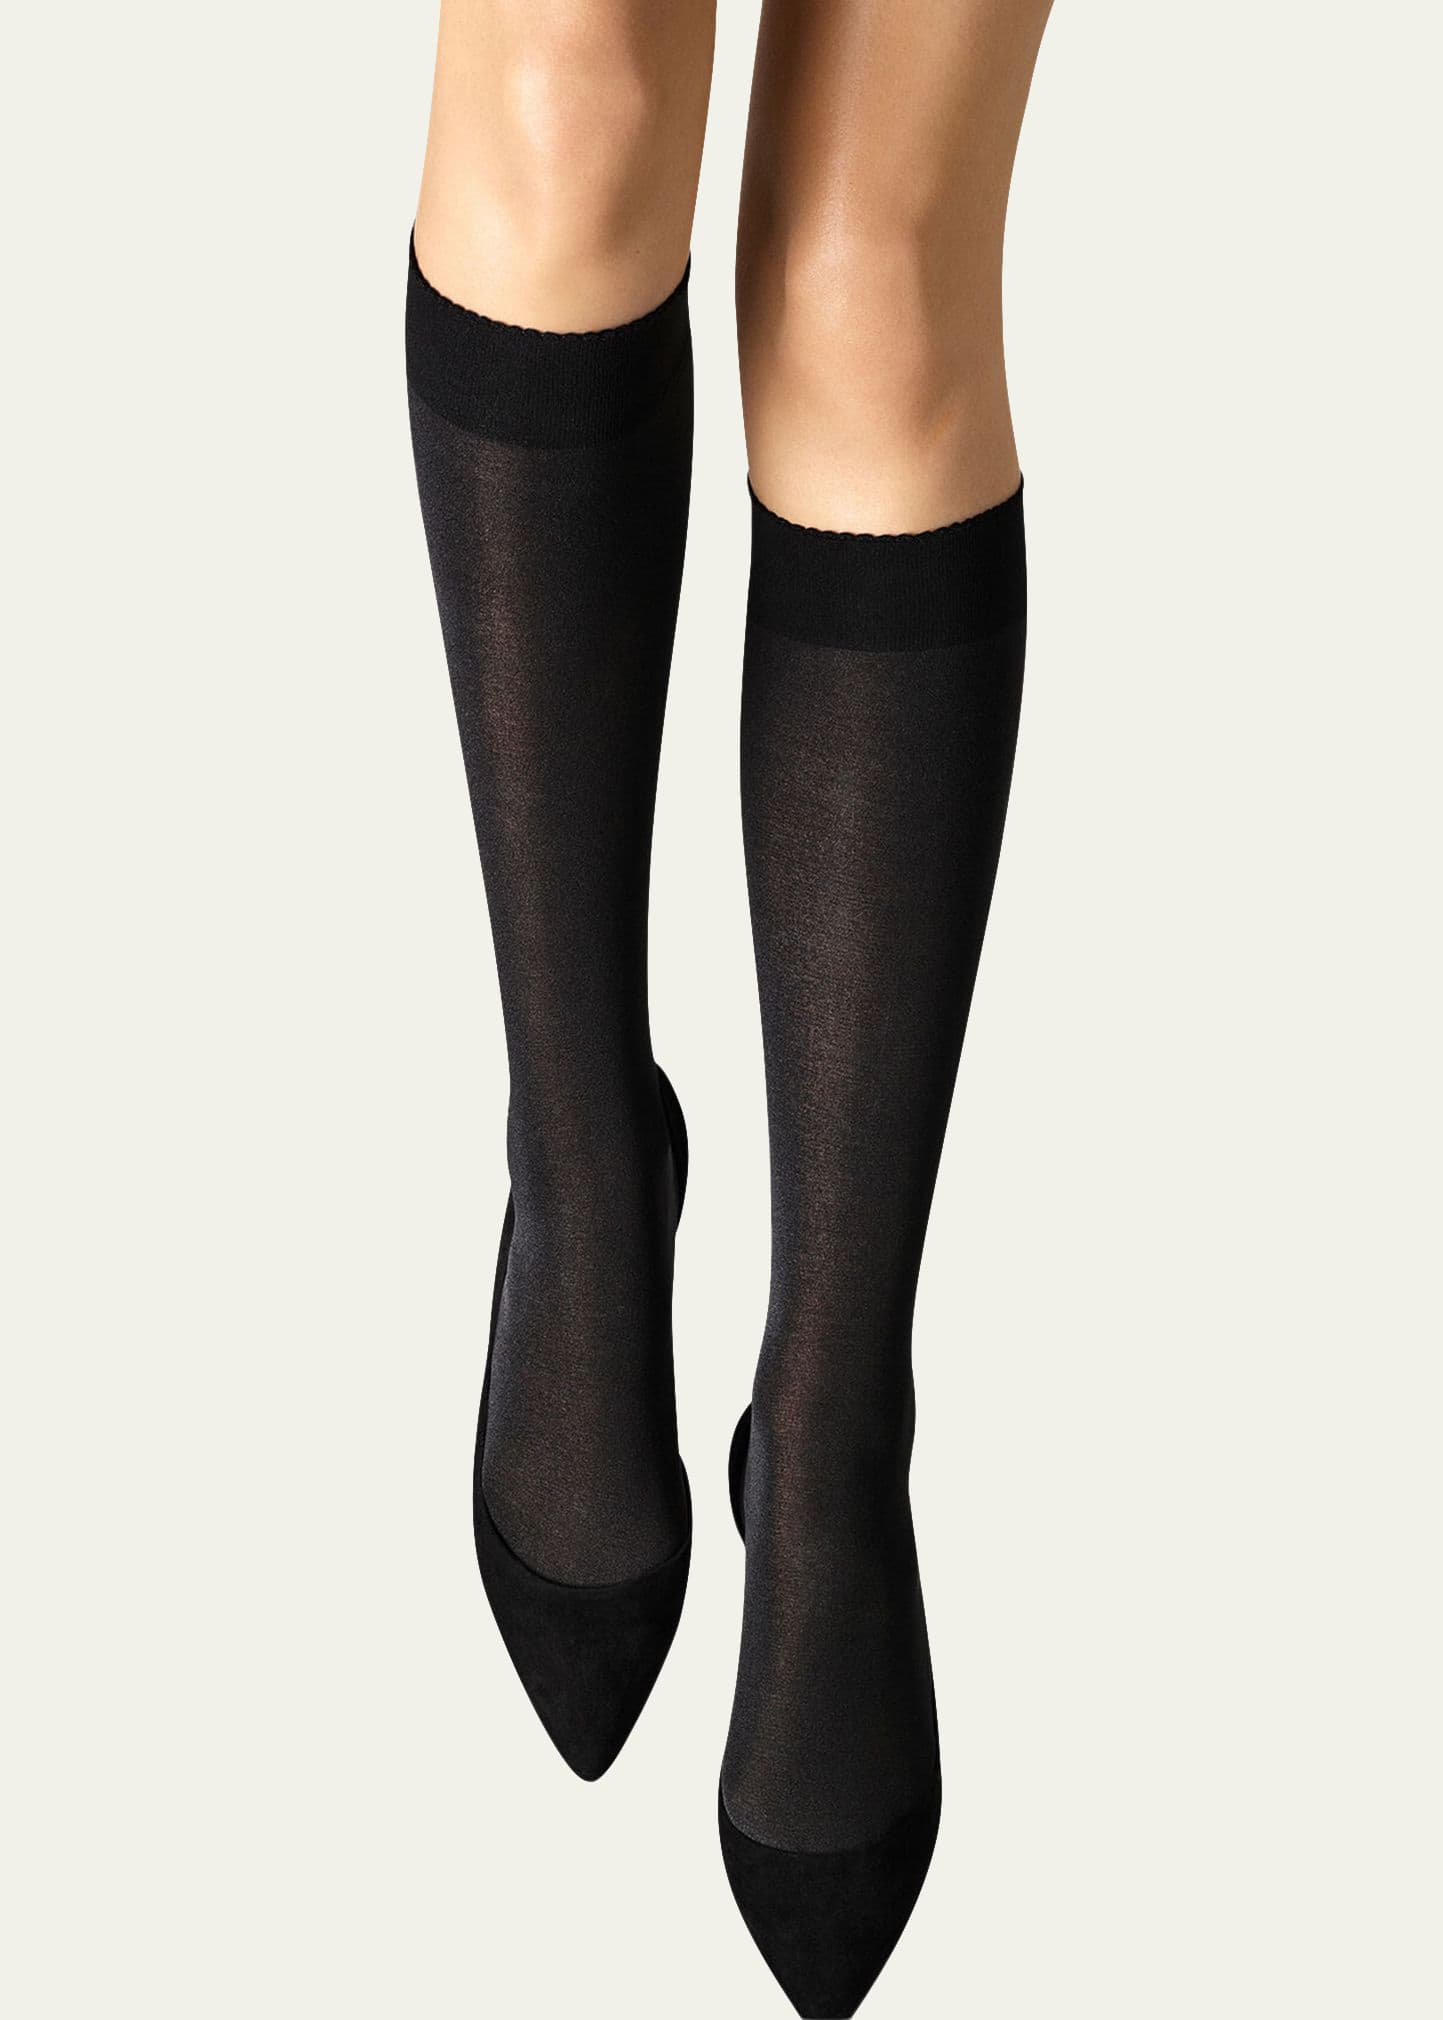 Wolford Velvet De Luxe Stay-Up Thigh Highs Stockings - Bergdorf Goodman